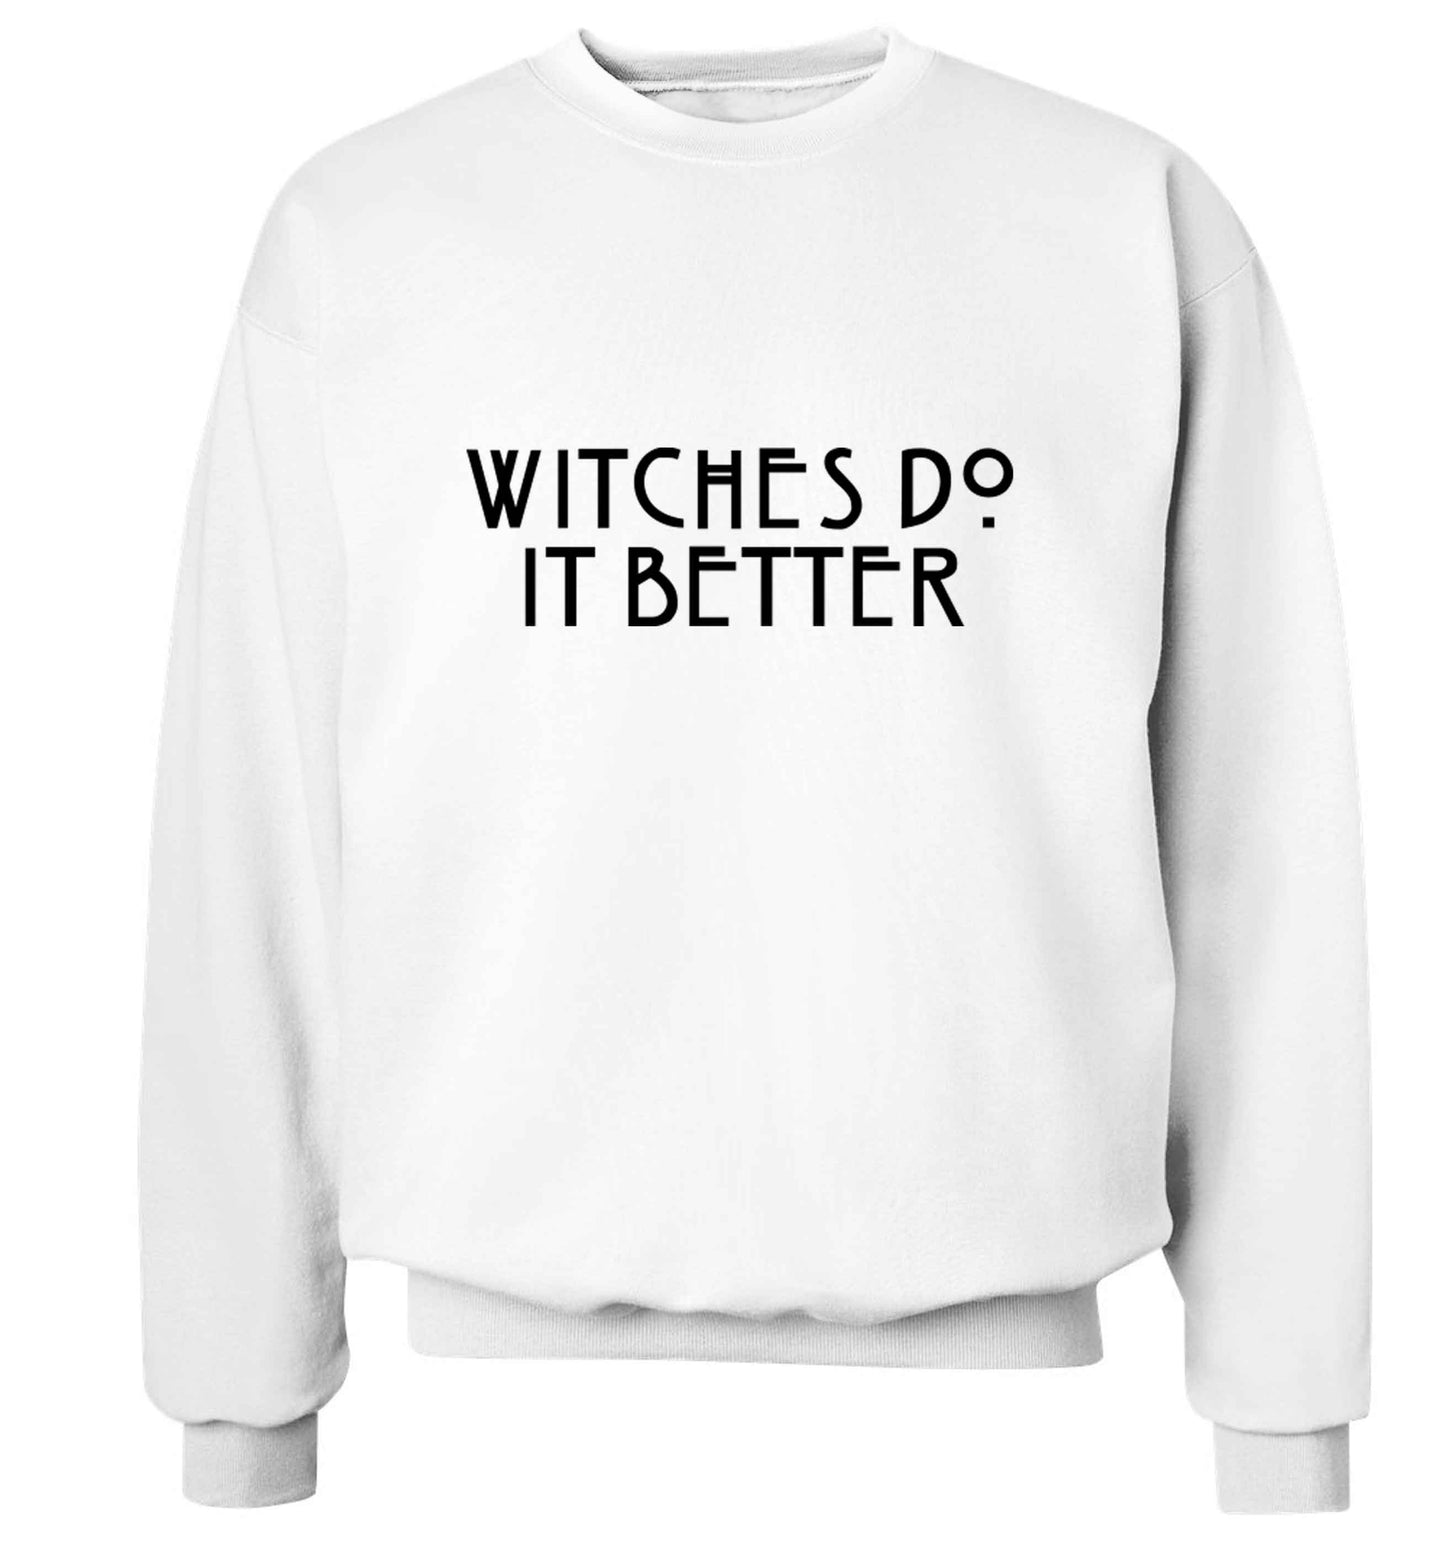 Witches do it better adult's unisex white sweater 2XL